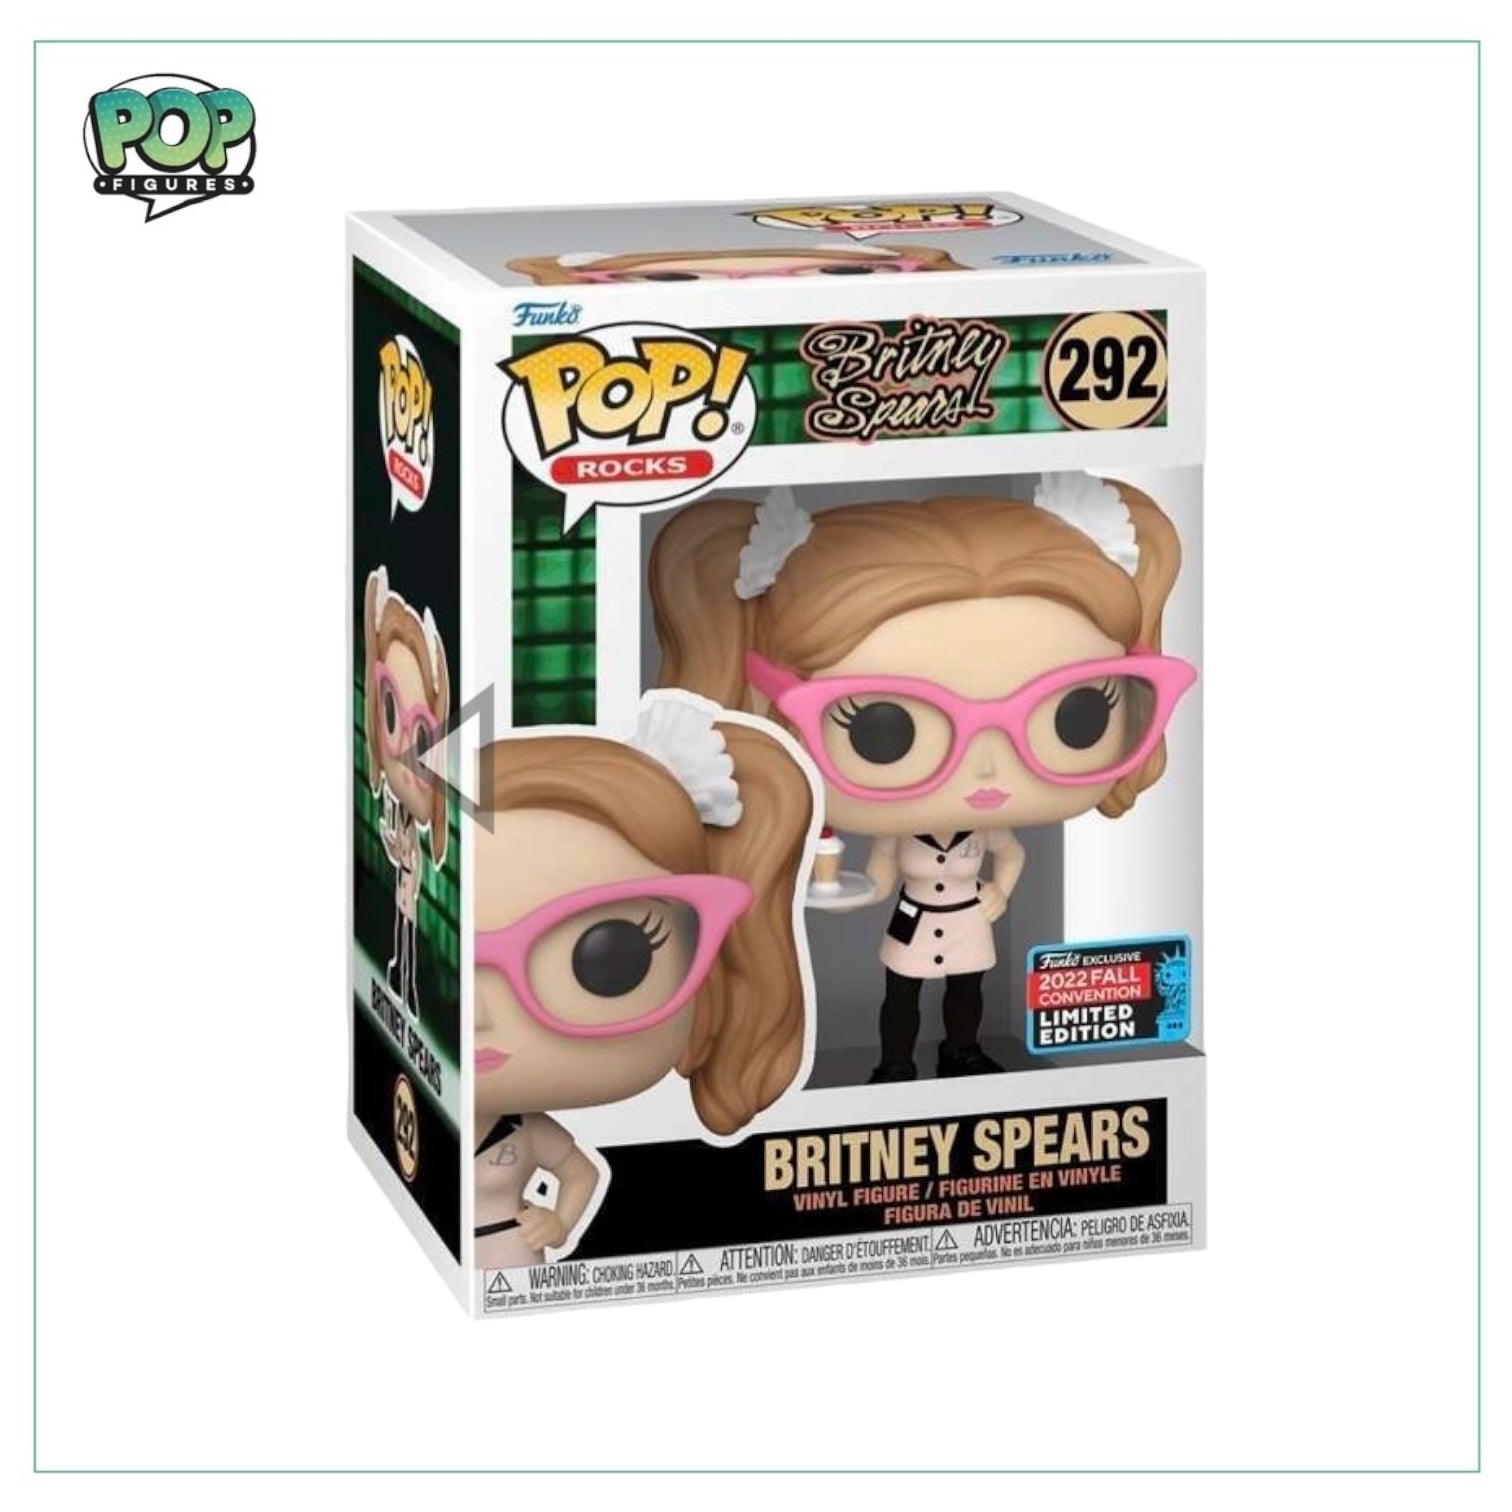 Britney Spears #292 Funko Pop! - Rocks - NYCC 2022 Shared Exclusive - Angry Cat